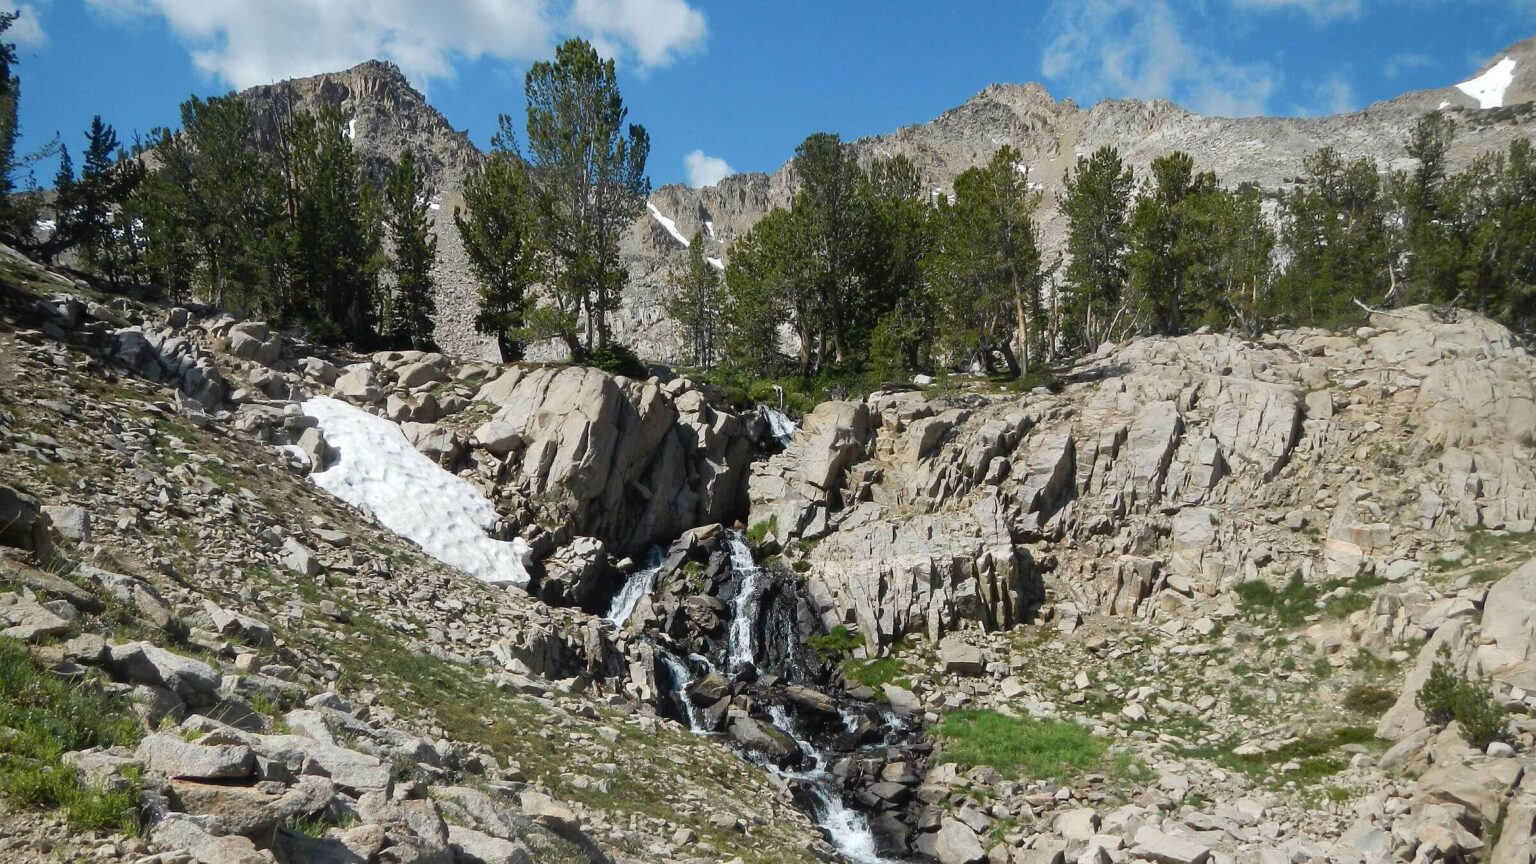 Cecil D. Andrus-White Clouds Wilderness, Boulder Chain Lakes Creek, August